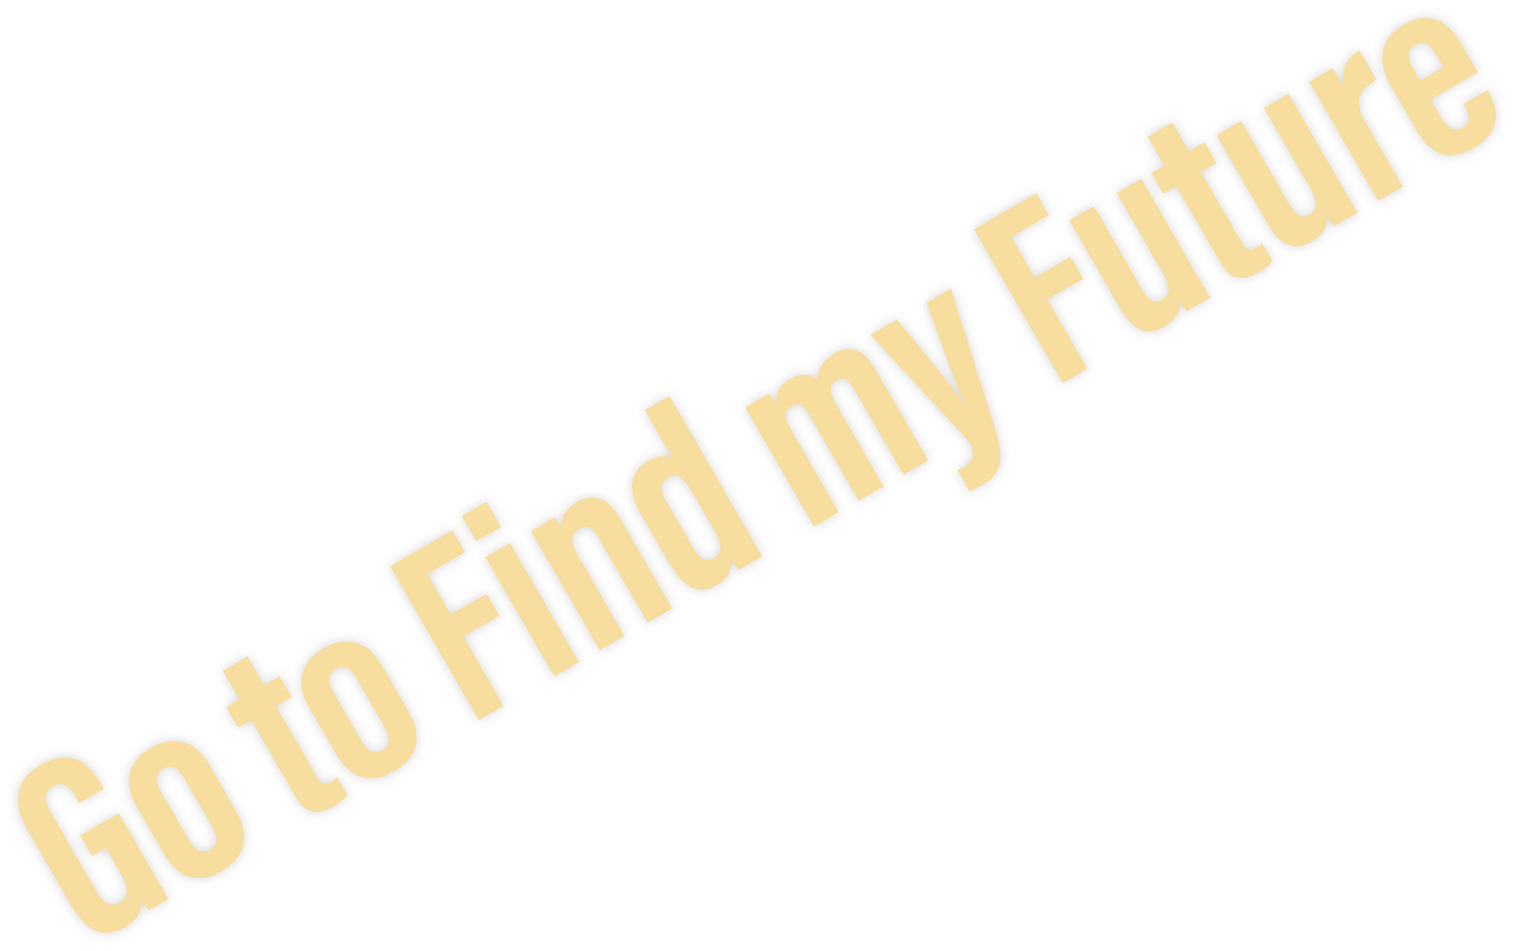 go to find my future